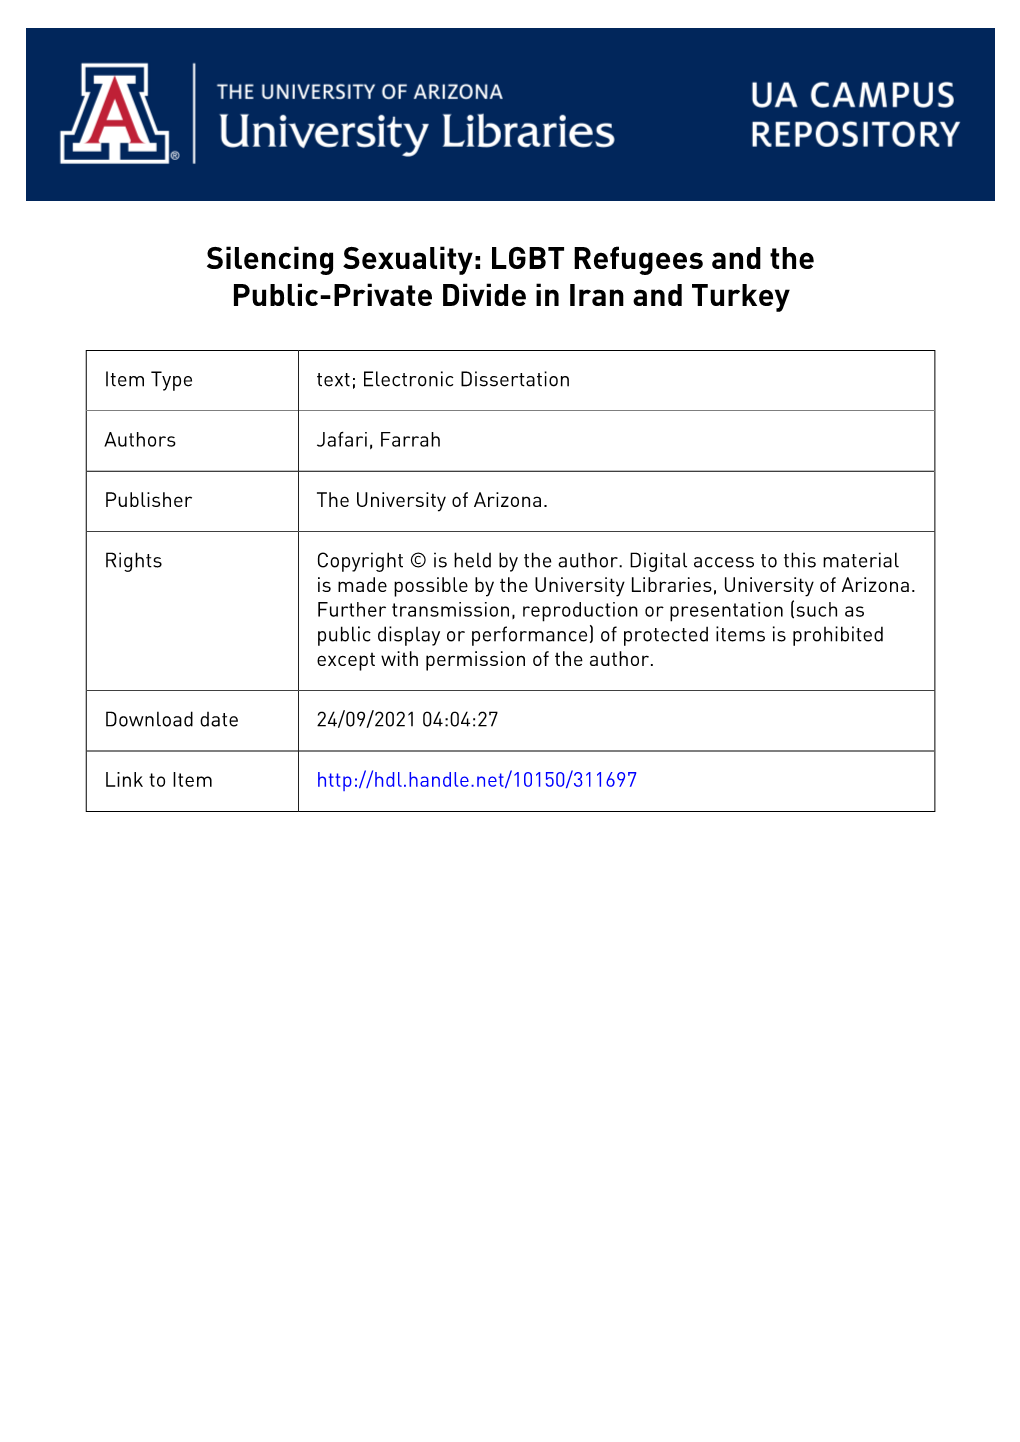 LGBT Refugees and the Public-Private Divide in Iran and Turkey